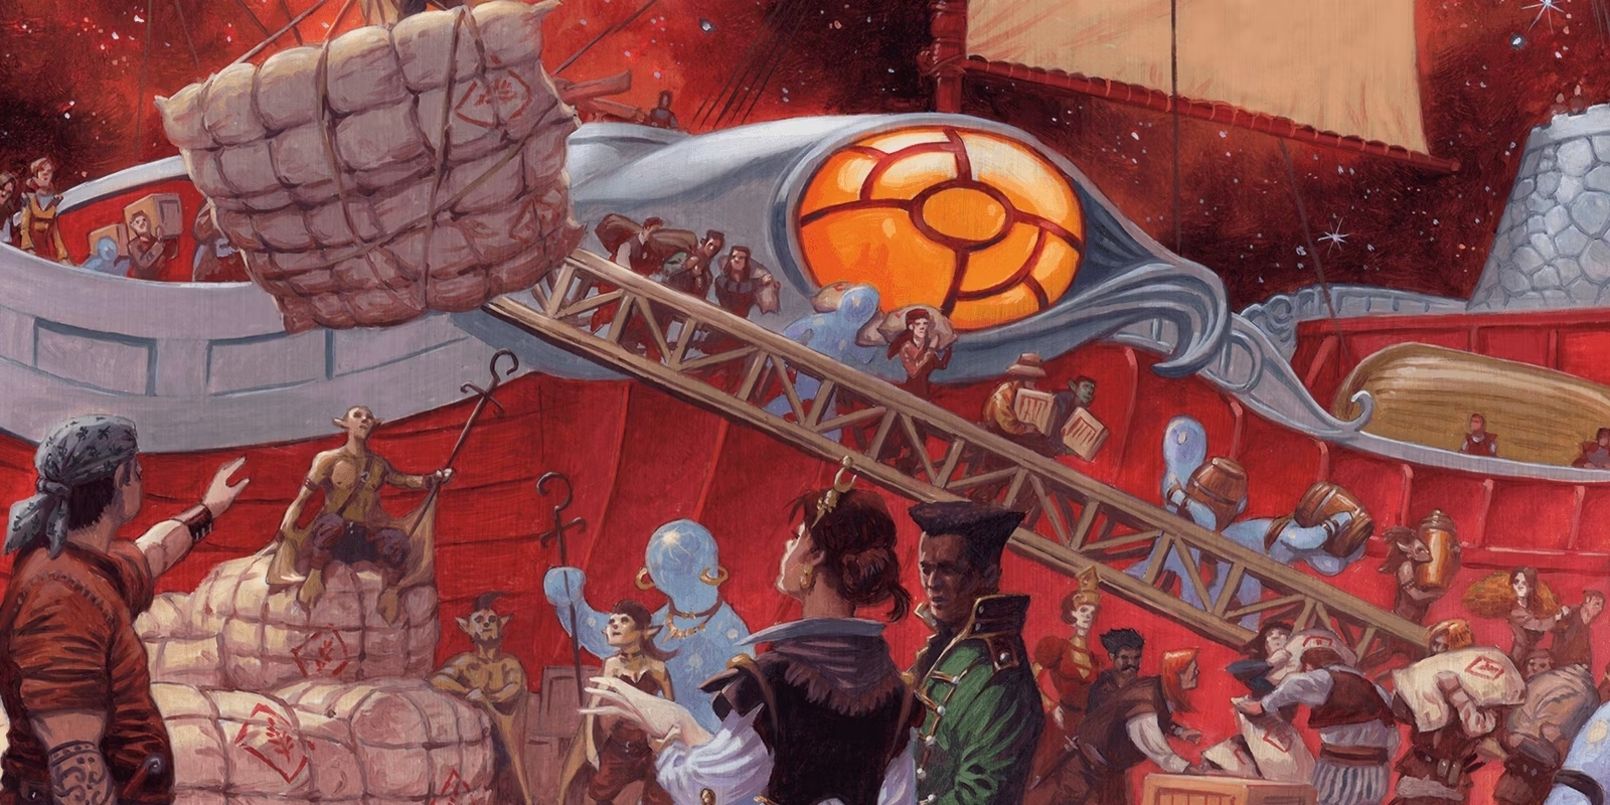 Image showing a Hammerhead ship from D&D Spelljammer, with people milling around loading the ship.